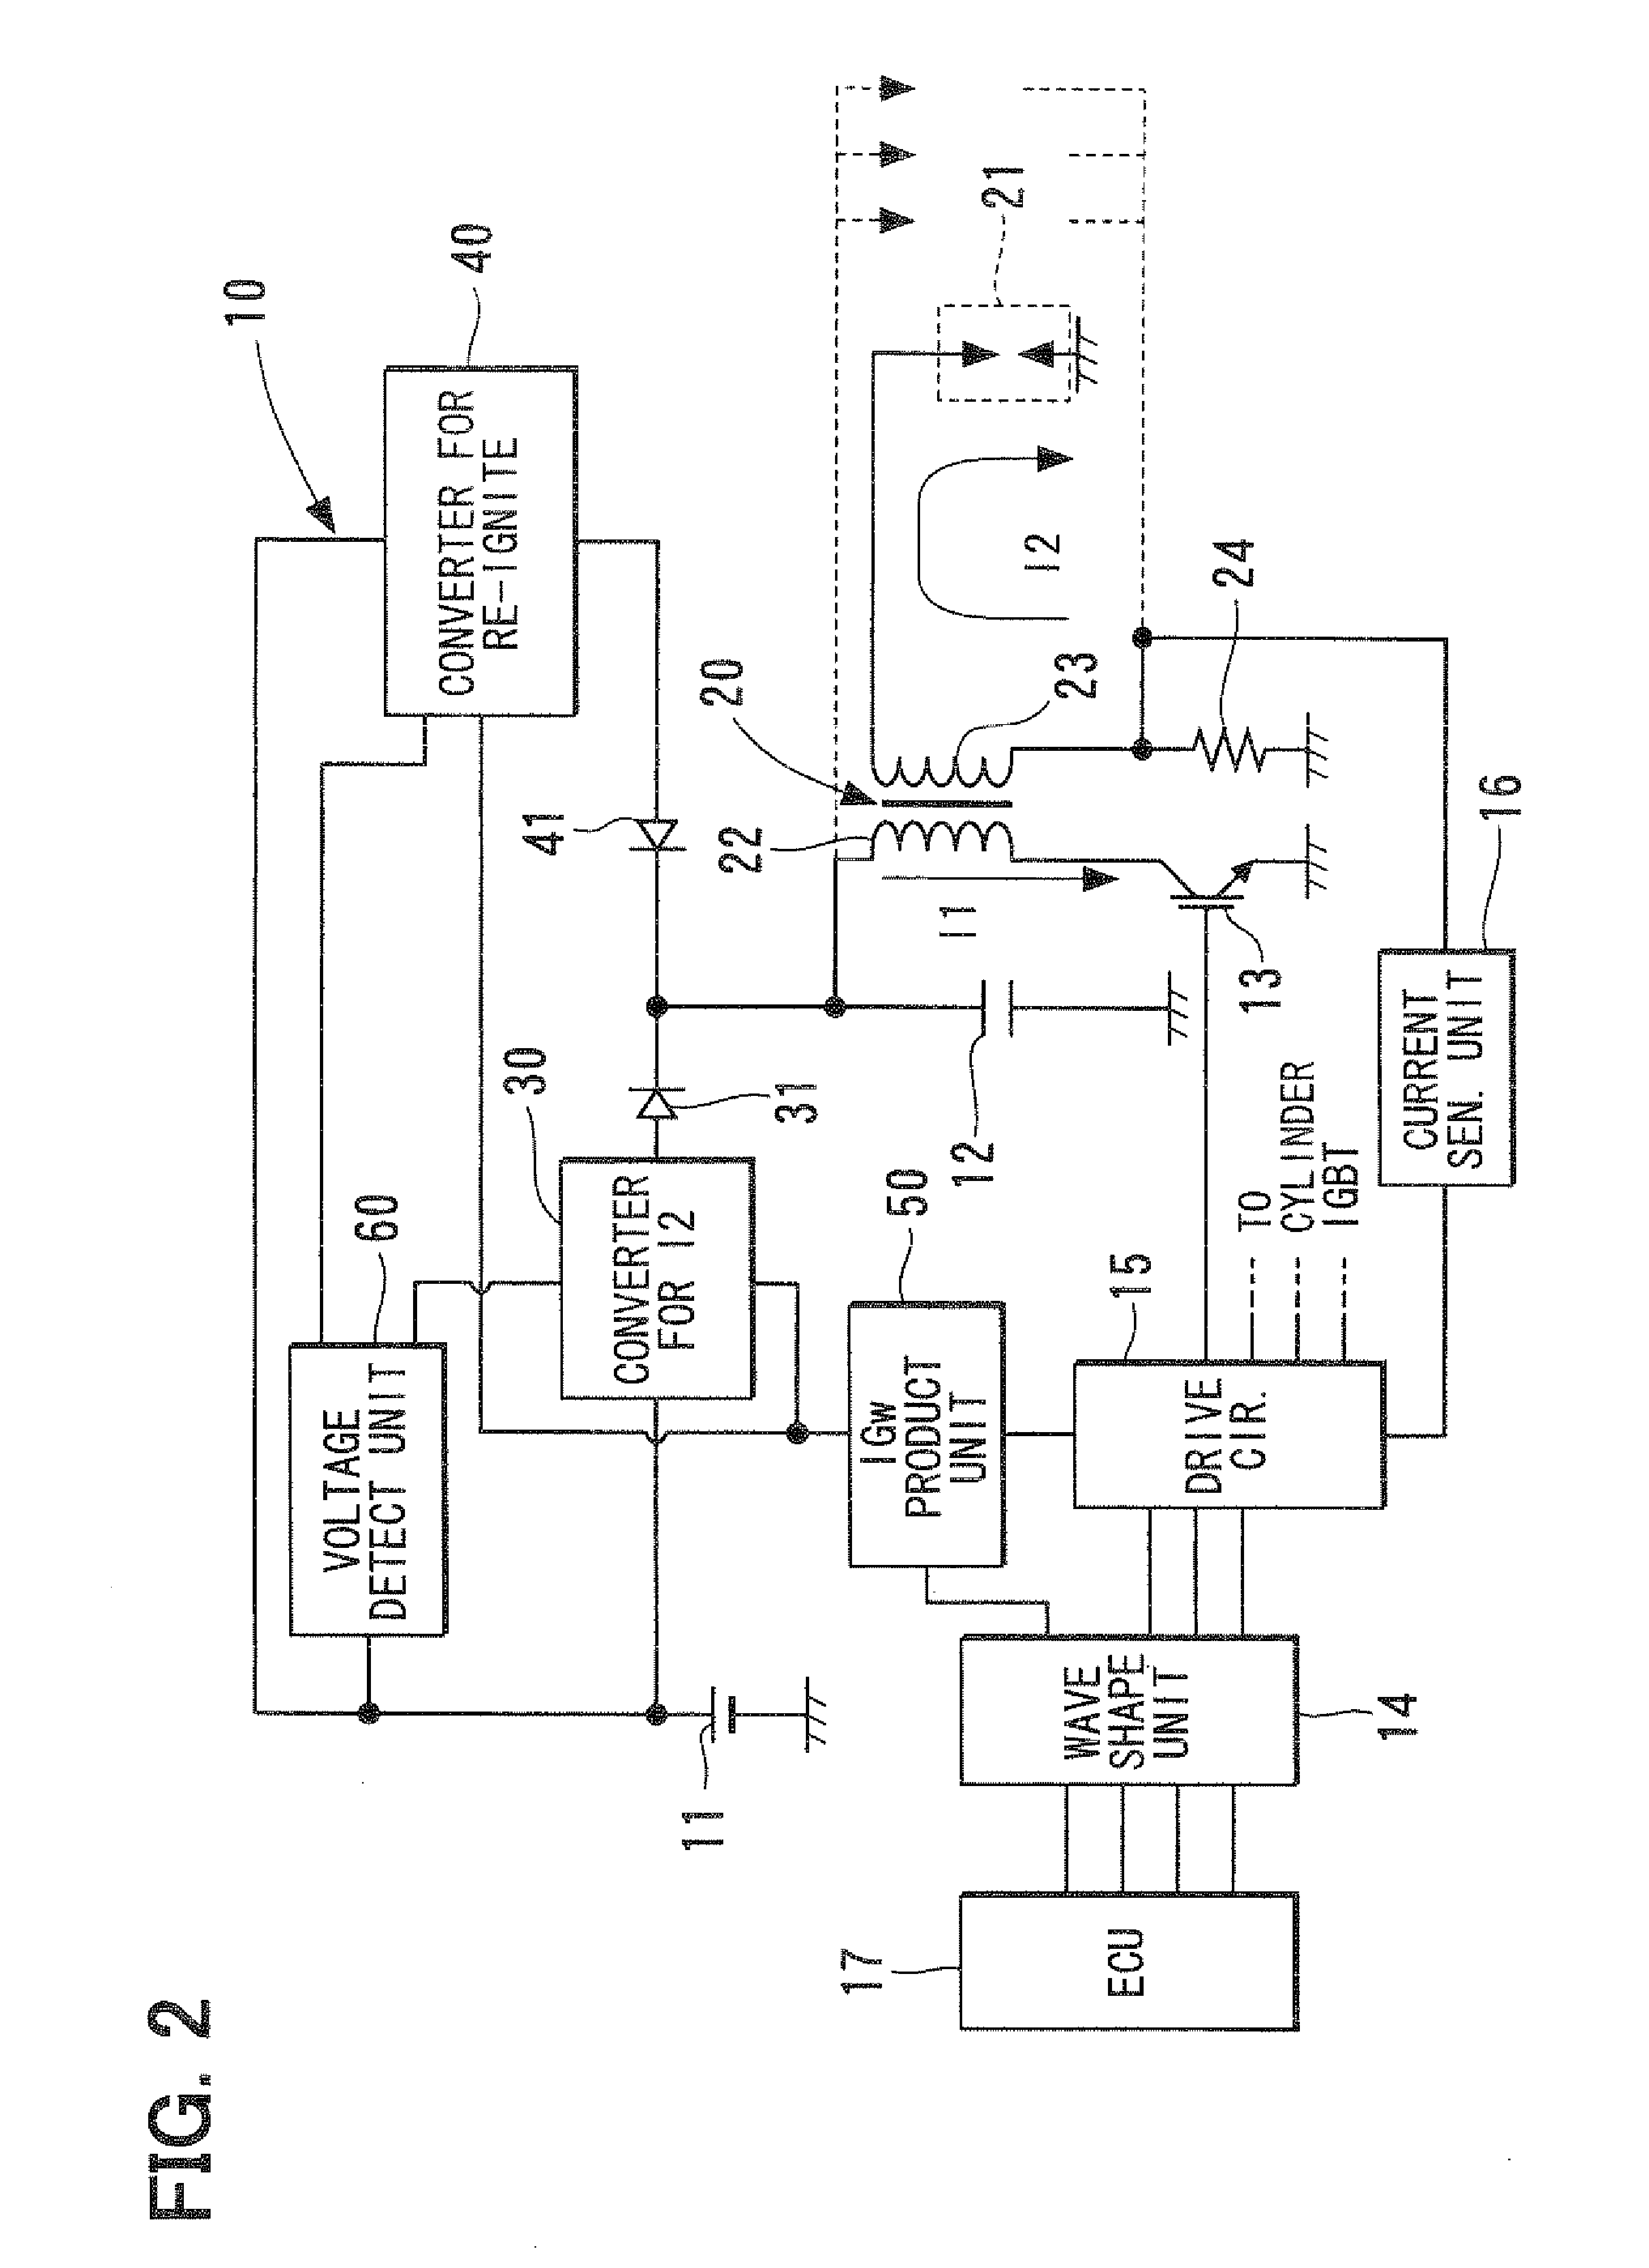 Ignition control device for internal combustion engine